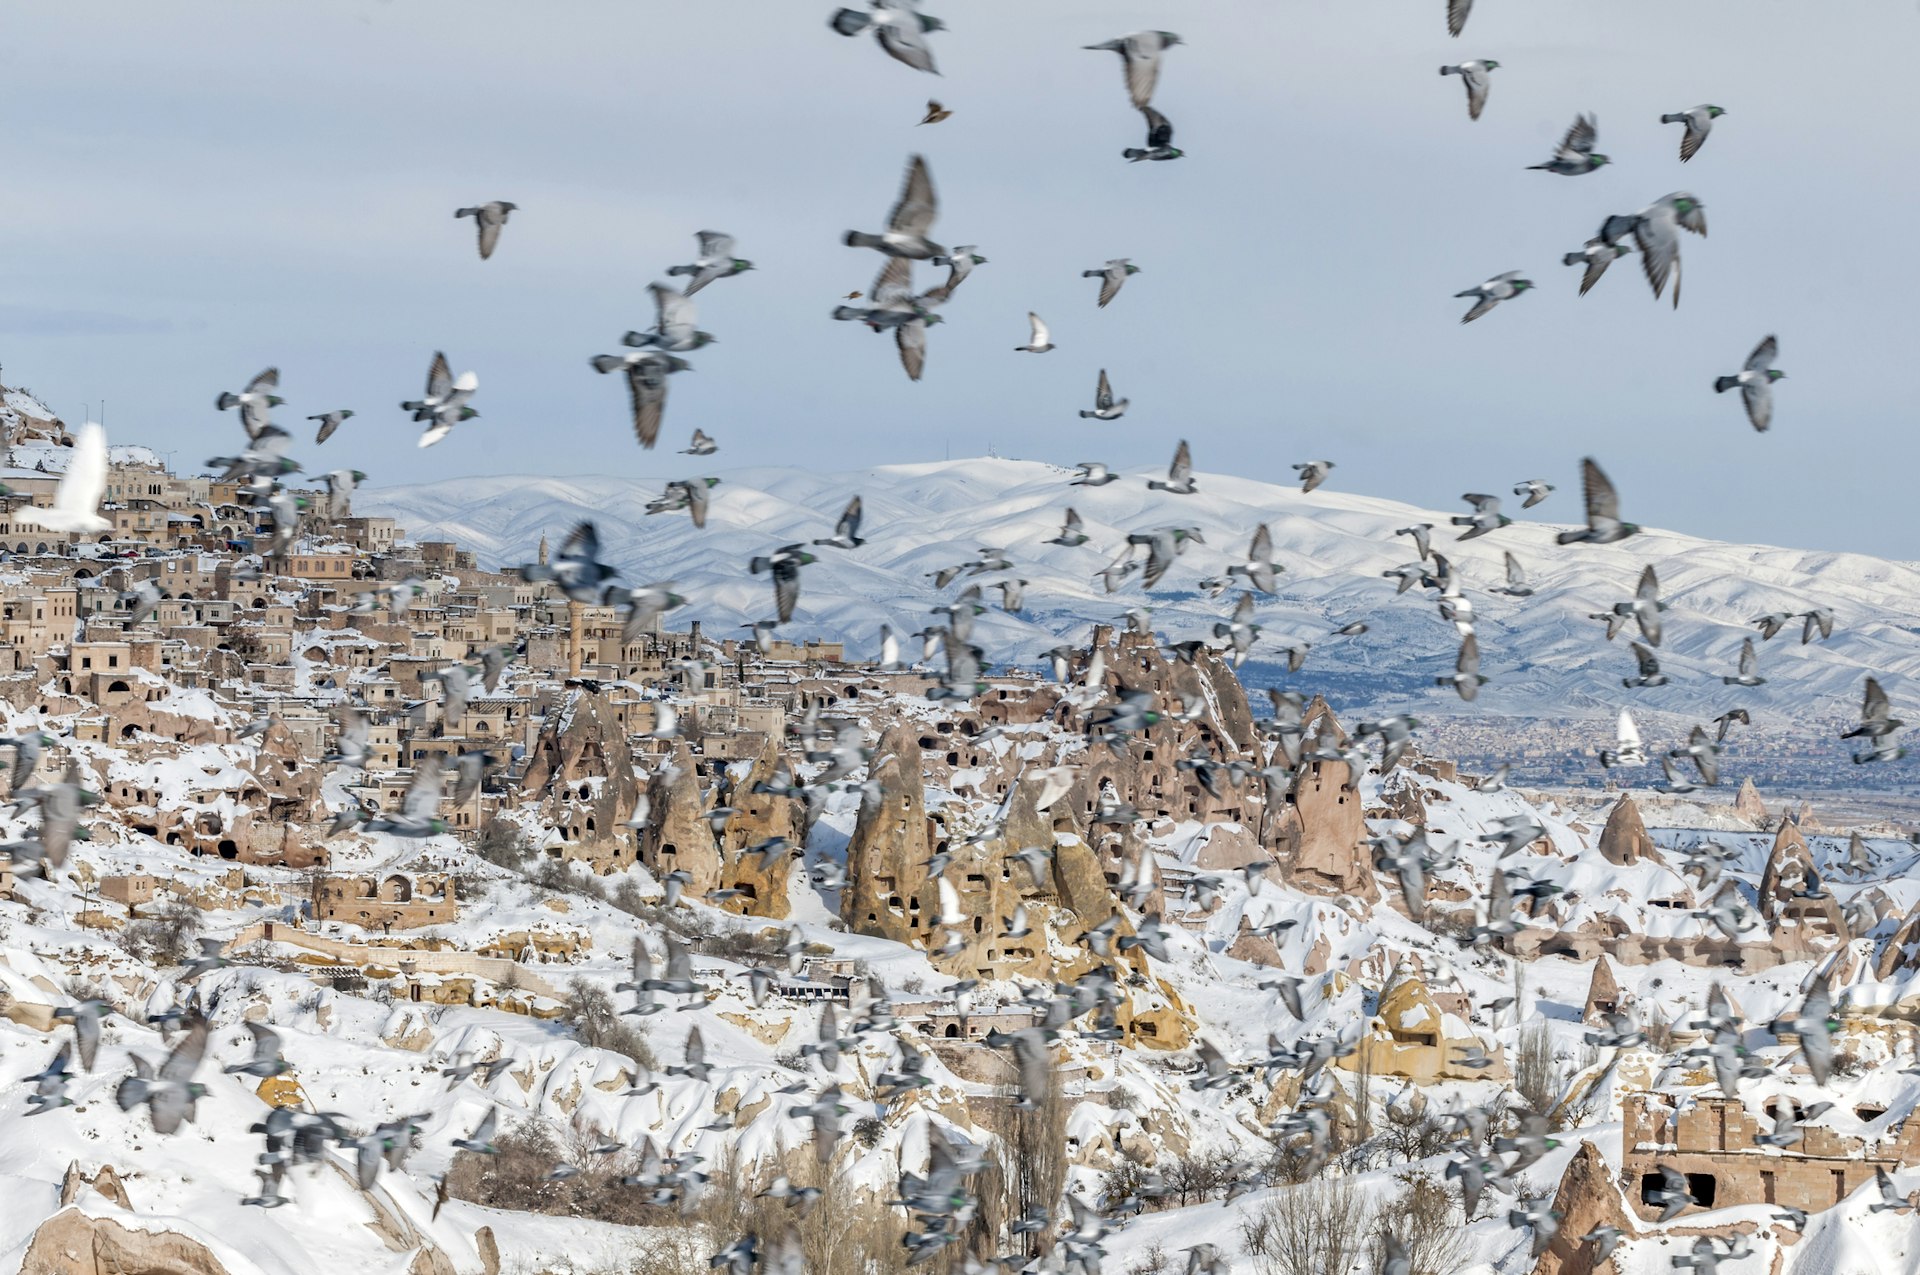 Cave dwellings in the snow as a flock of birds flies by